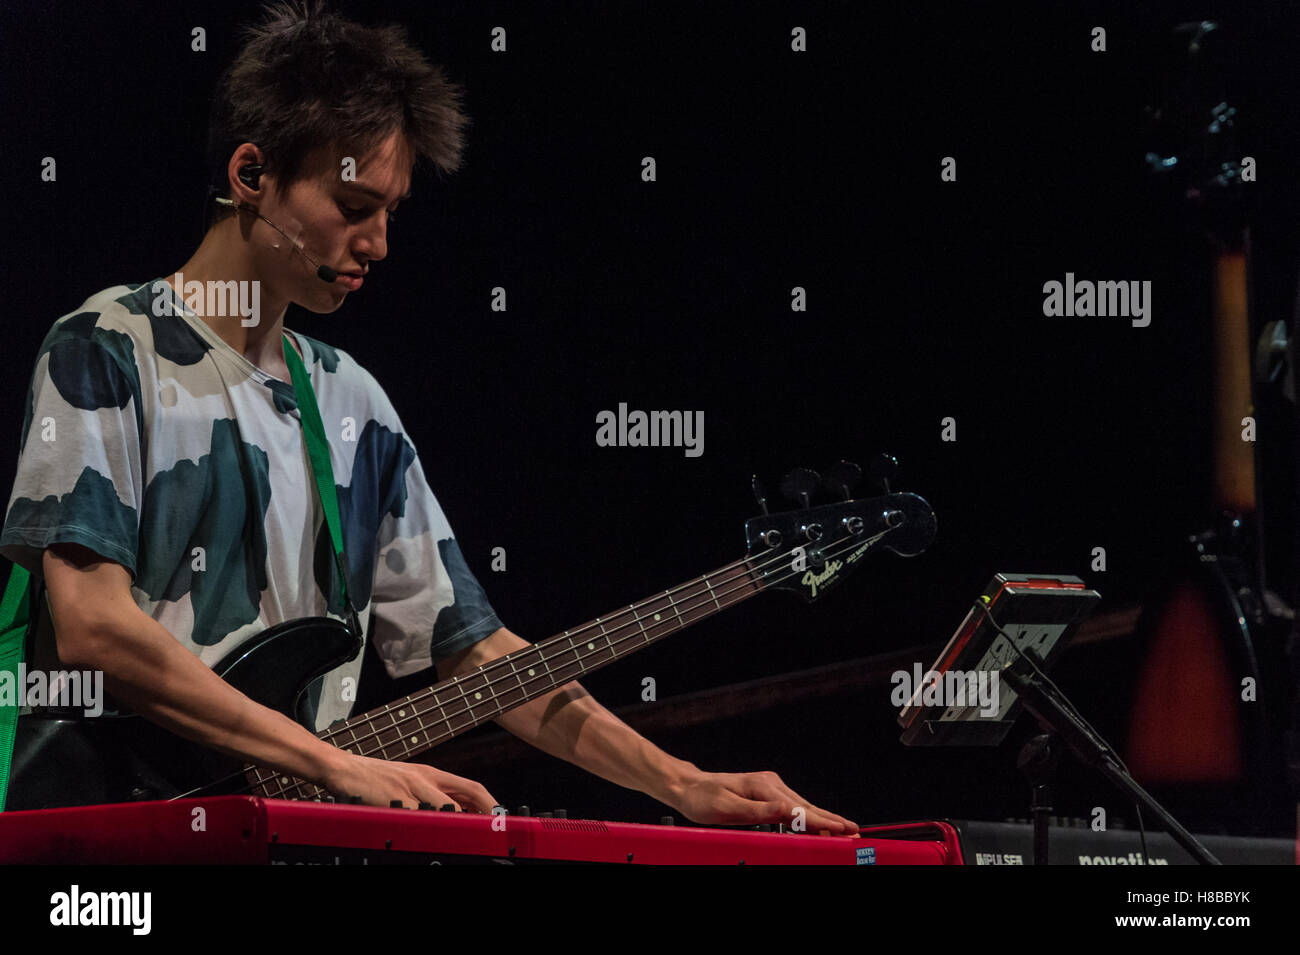 Rome, Italy. 09th Nov, 2016. A versatile musician, appreciated by Quincy Jones, Herbie Hancock and Pat Metheny who called him a genius, he performed live on the stage of the Auditorium Parco della Musica. © Leo Claudio De Petris/Pacific Press/Alamy Live News Stock Photo